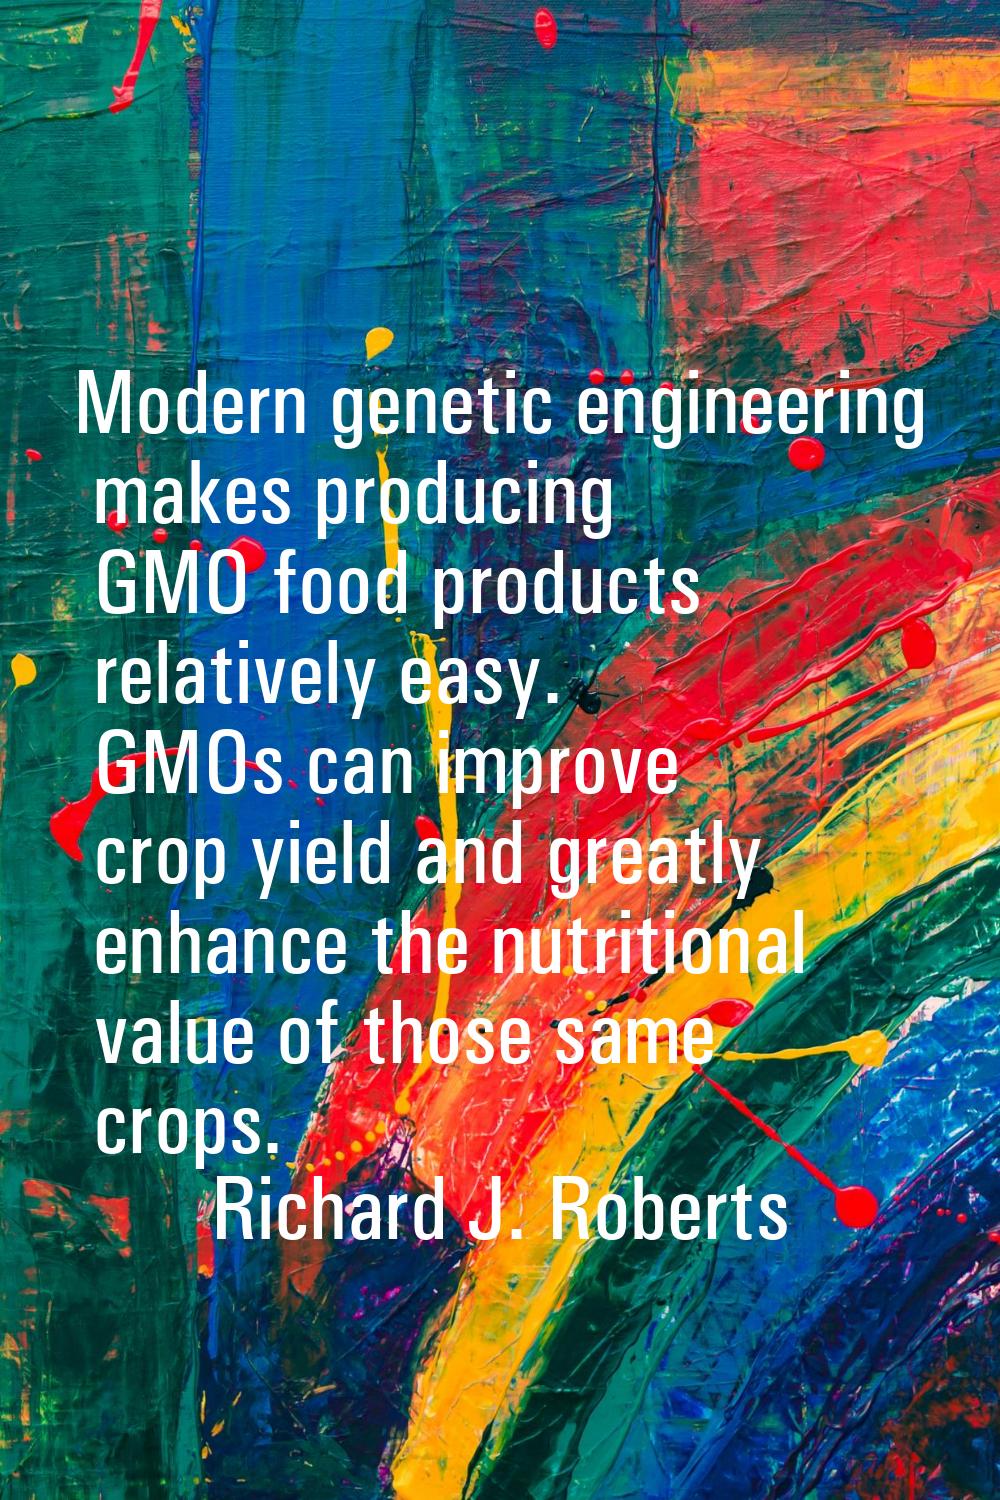 Modern genetic engineering makes producing GMO food products relatively easy. GMOs can improve crop